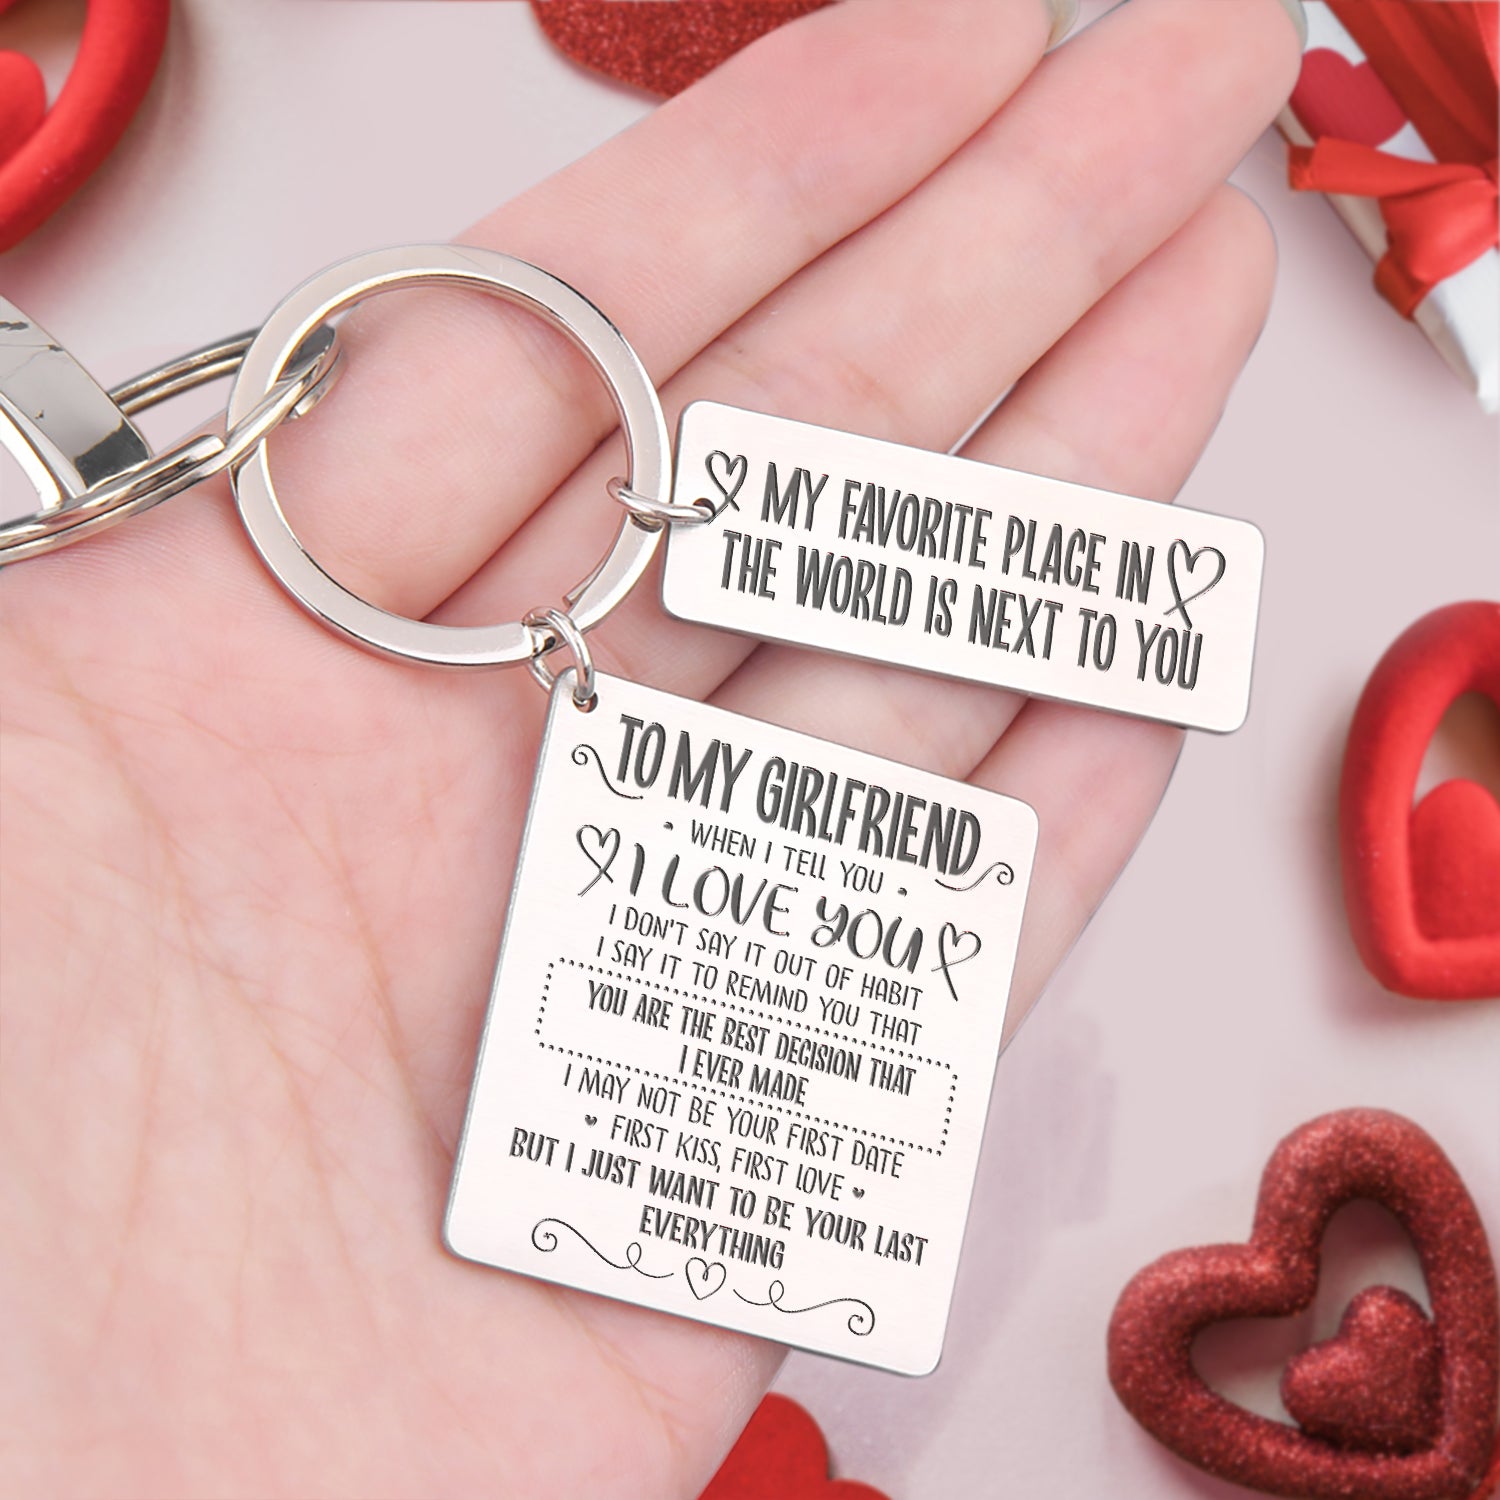 Calendar Keychain - To My Girlfriend - You Are The Best Thing That Ever Happened To Me - Ukgkr13002 - Love My Soulmate